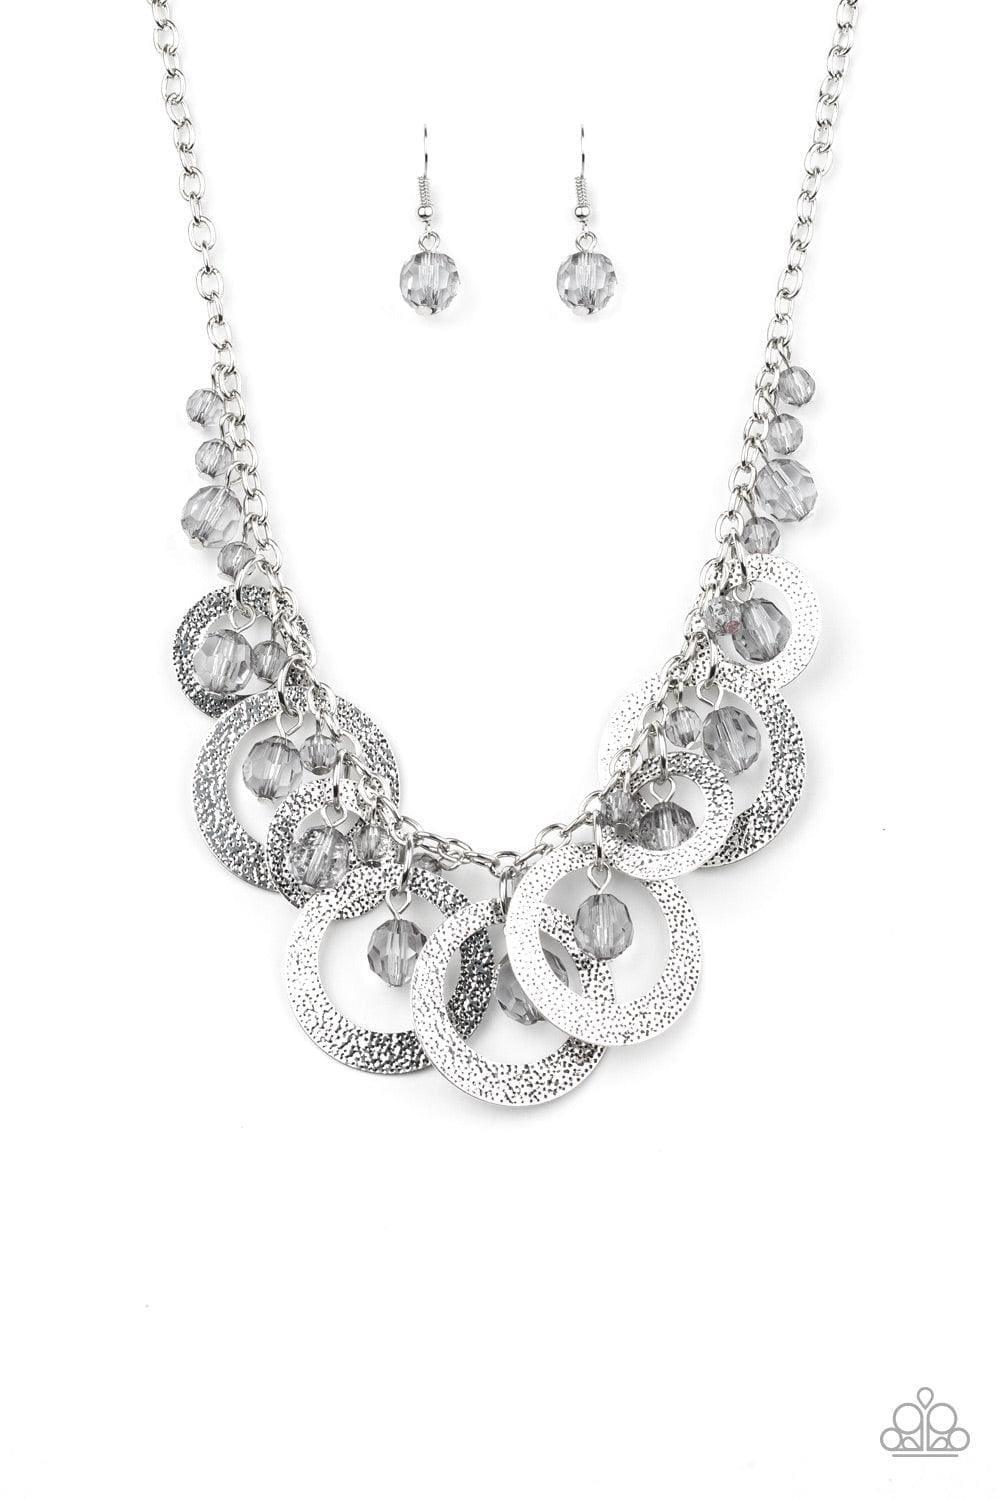 Paparazzi Accessories - Turn It Up - Silver Necklace - Bling by JessieK